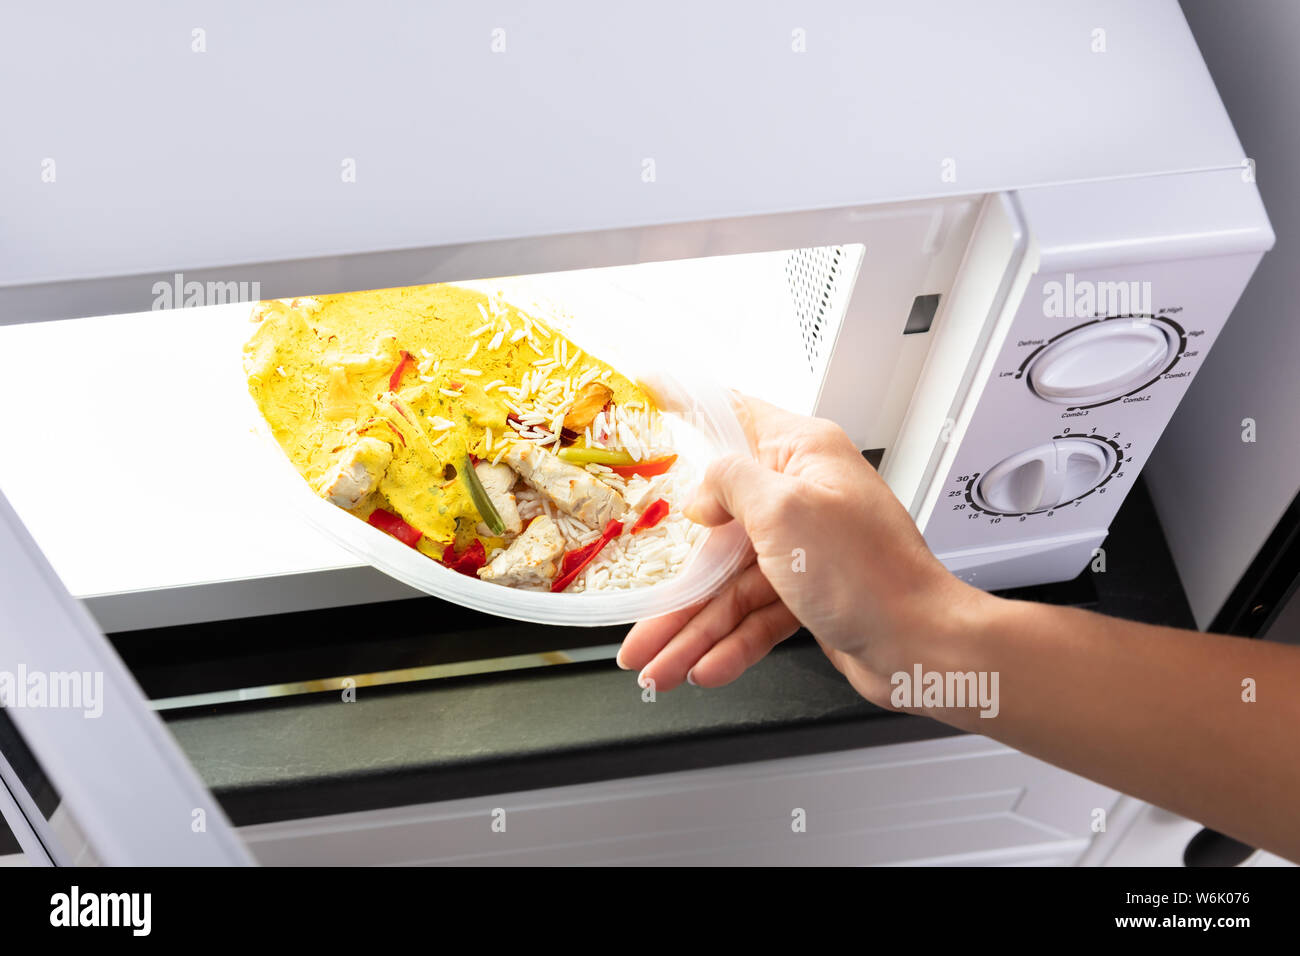 https://c8.alamy.com/comp/W6K076/close-up-of-a-person-heating-food-in-microwave-oven-W6K076.jpg